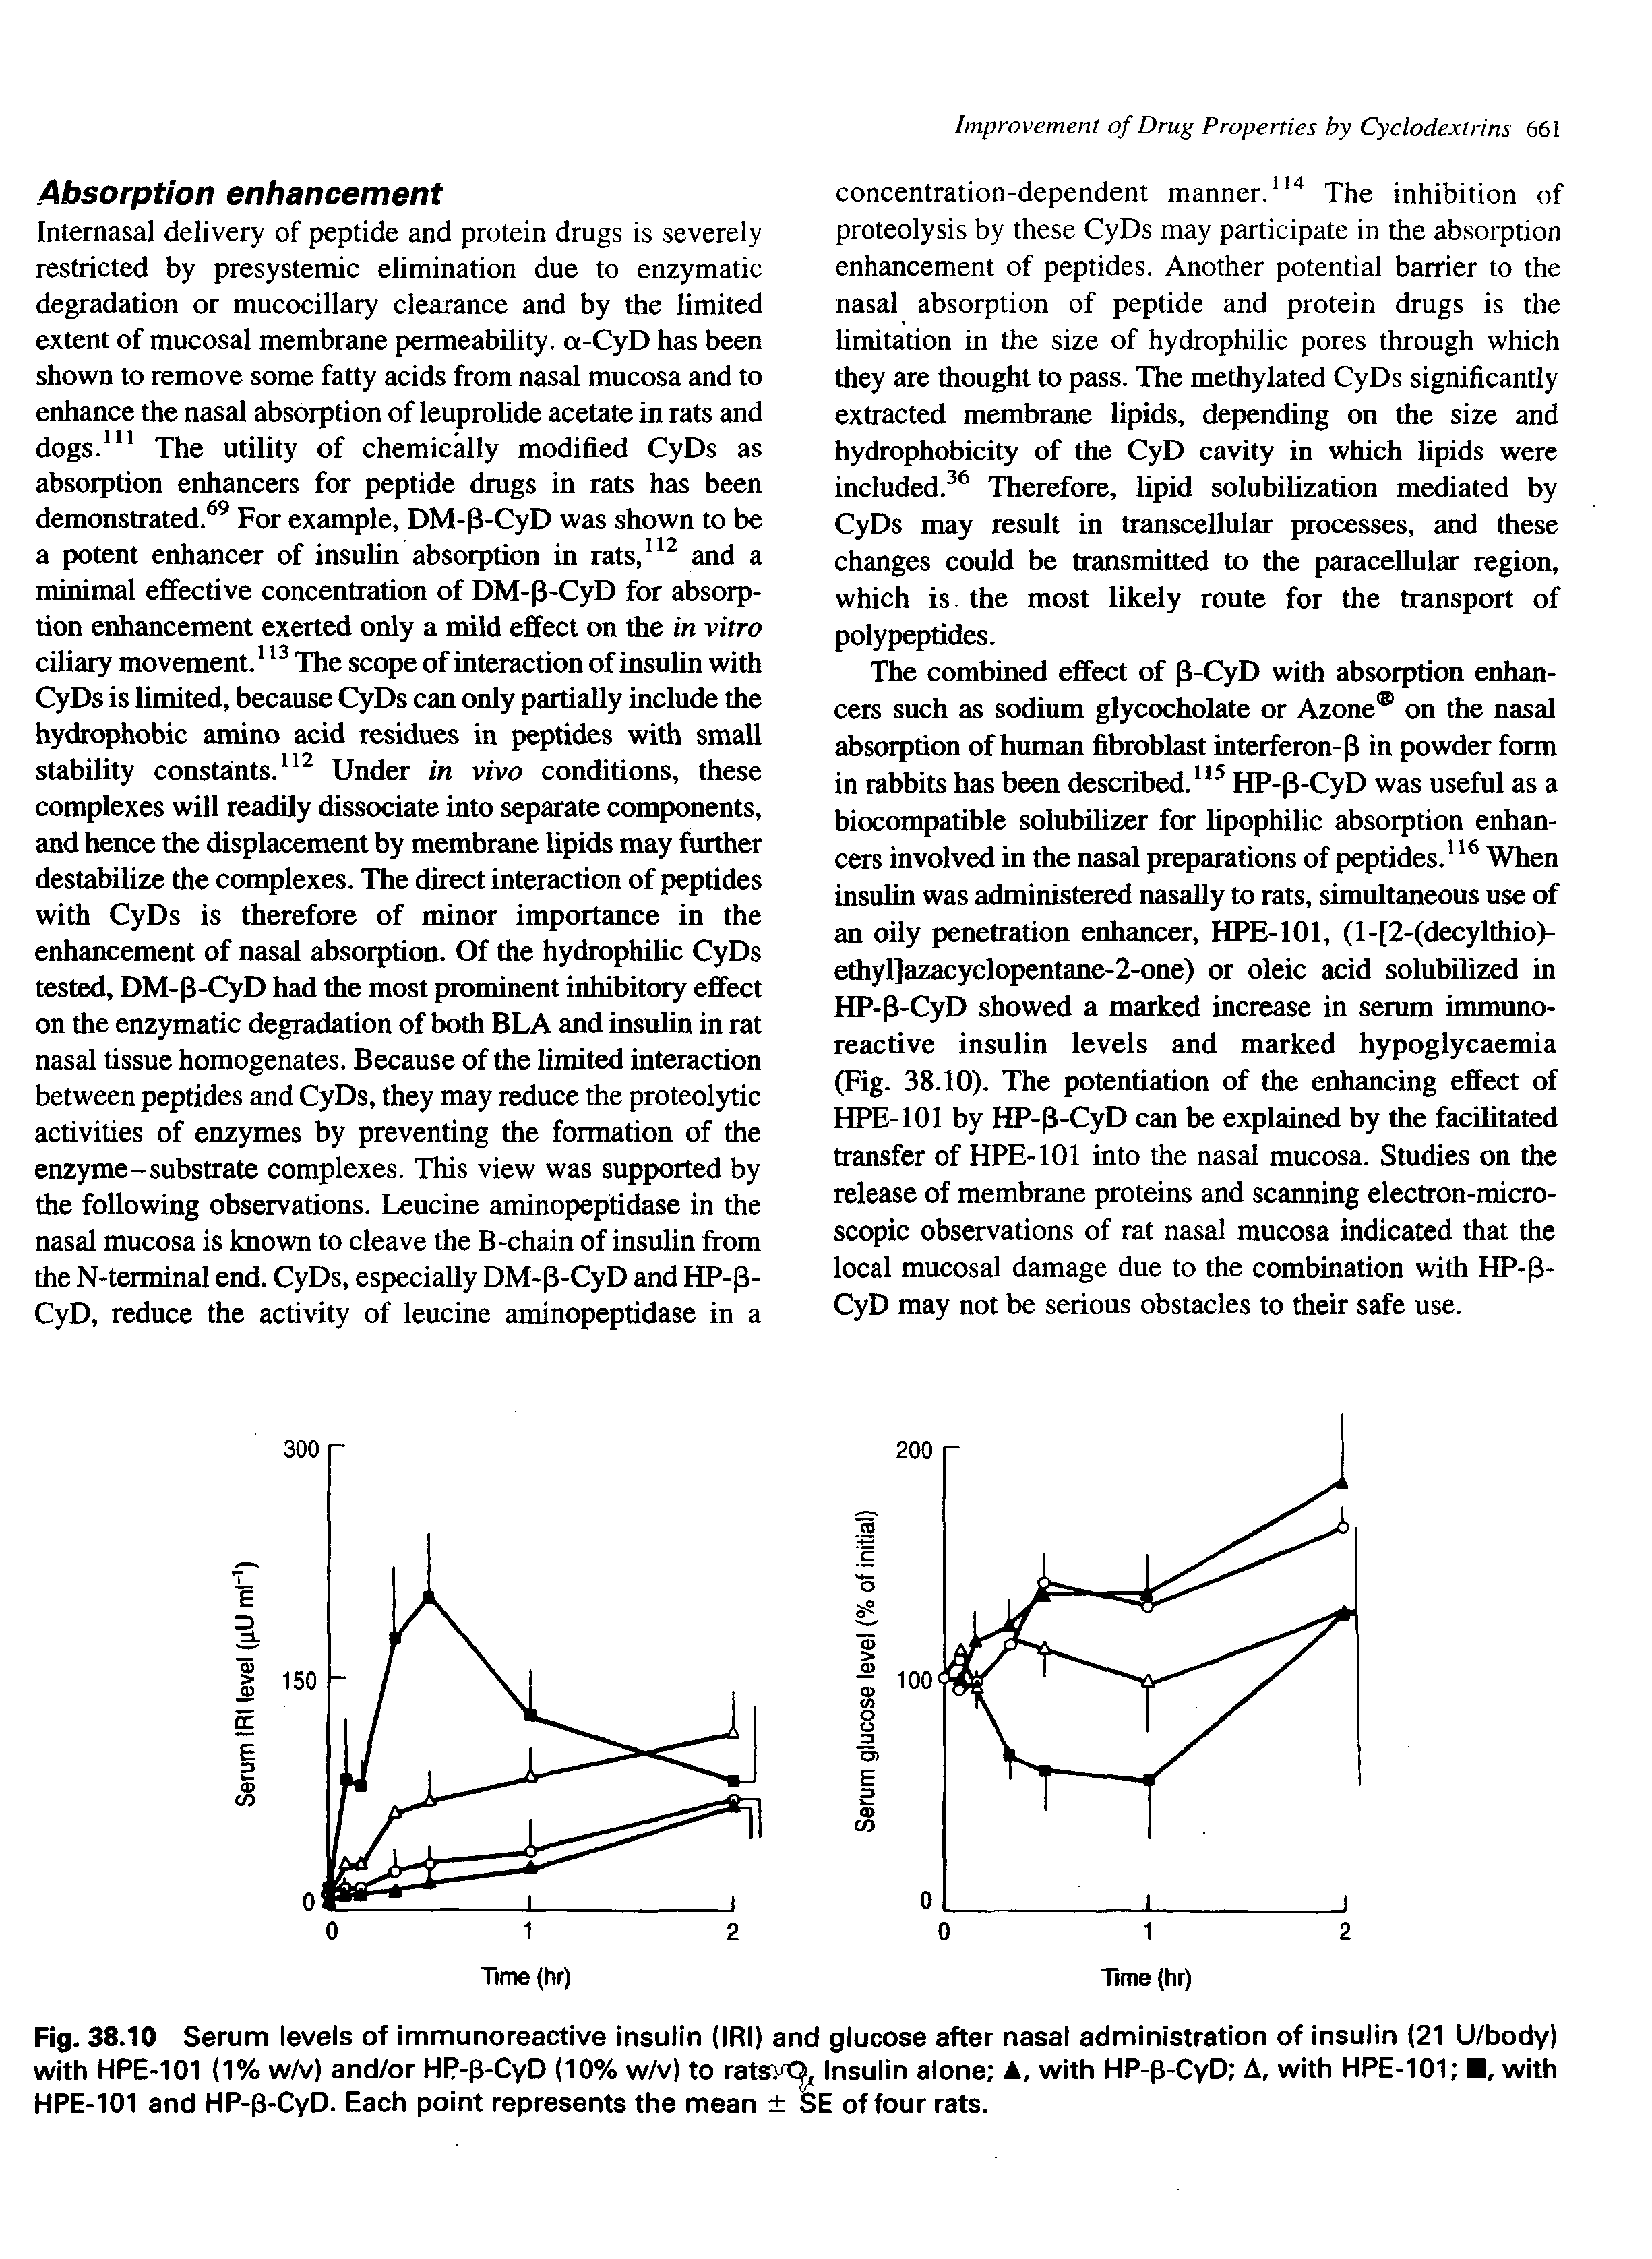 Fig. 38.10 Serum levels of immunoreactive insulin (IRI) and glucose after nasal administration of insulin (21 U/body) with HPE-101 (1% w/v) and/or HP-p-CyD (10% w/v) to ratsvt Insulin alone A, with HP-p-CyD A, with HPE-101 , with HPE-101 and HP-p-CyD. Each point represents the mean SE of four rats.